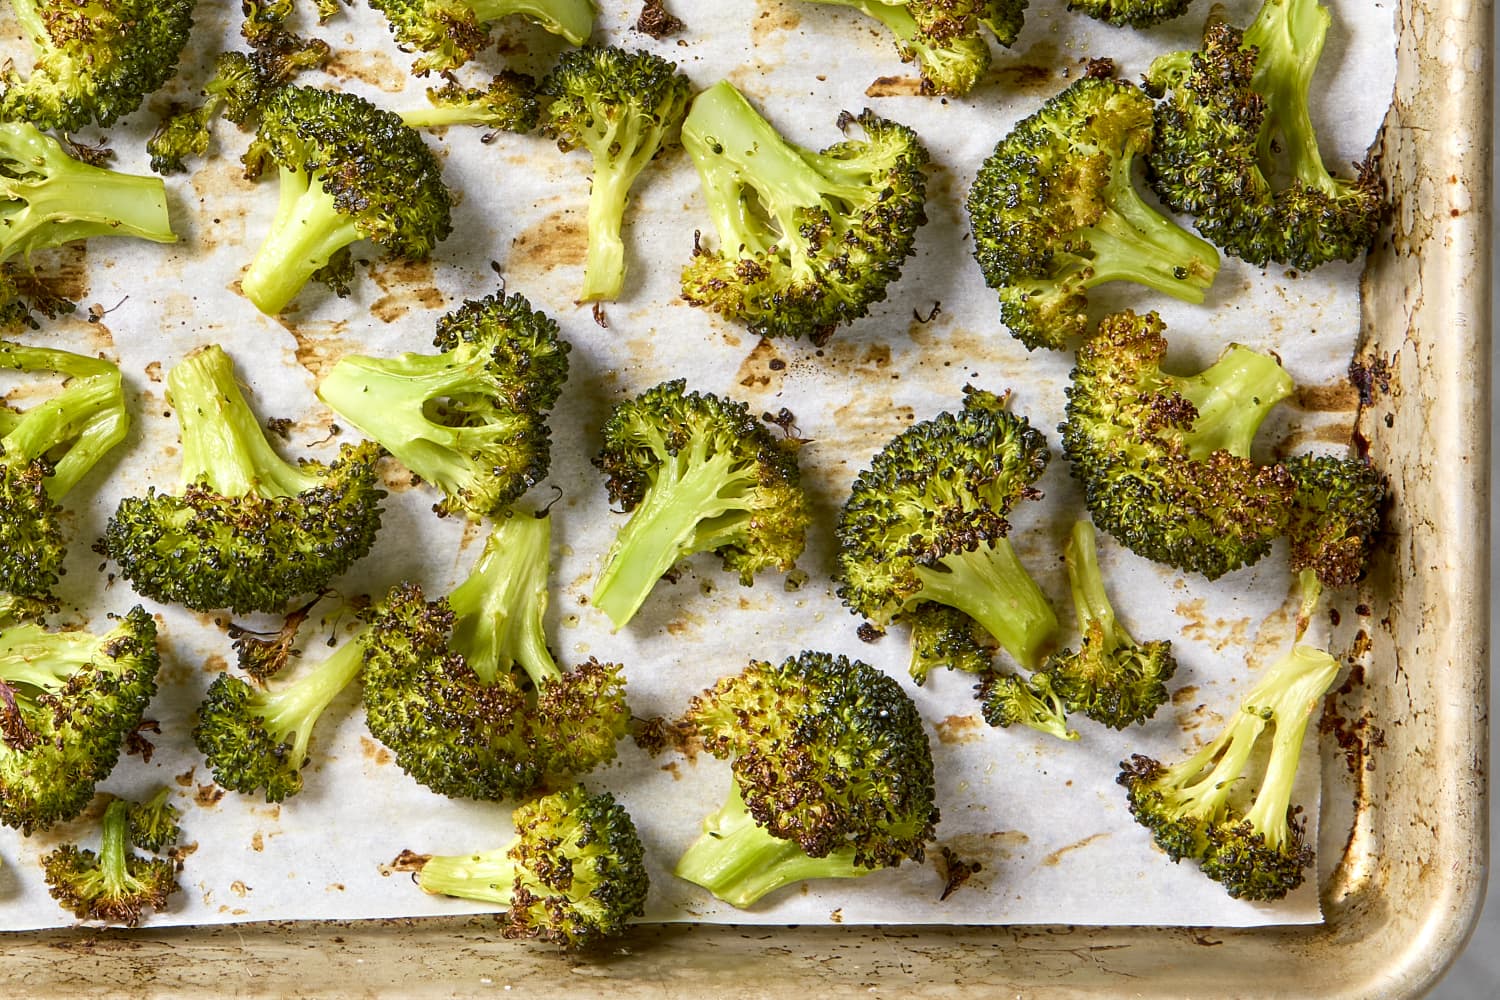 The Restaurant Trick for Making Roasted Broccoli Taste Ridiculously Good